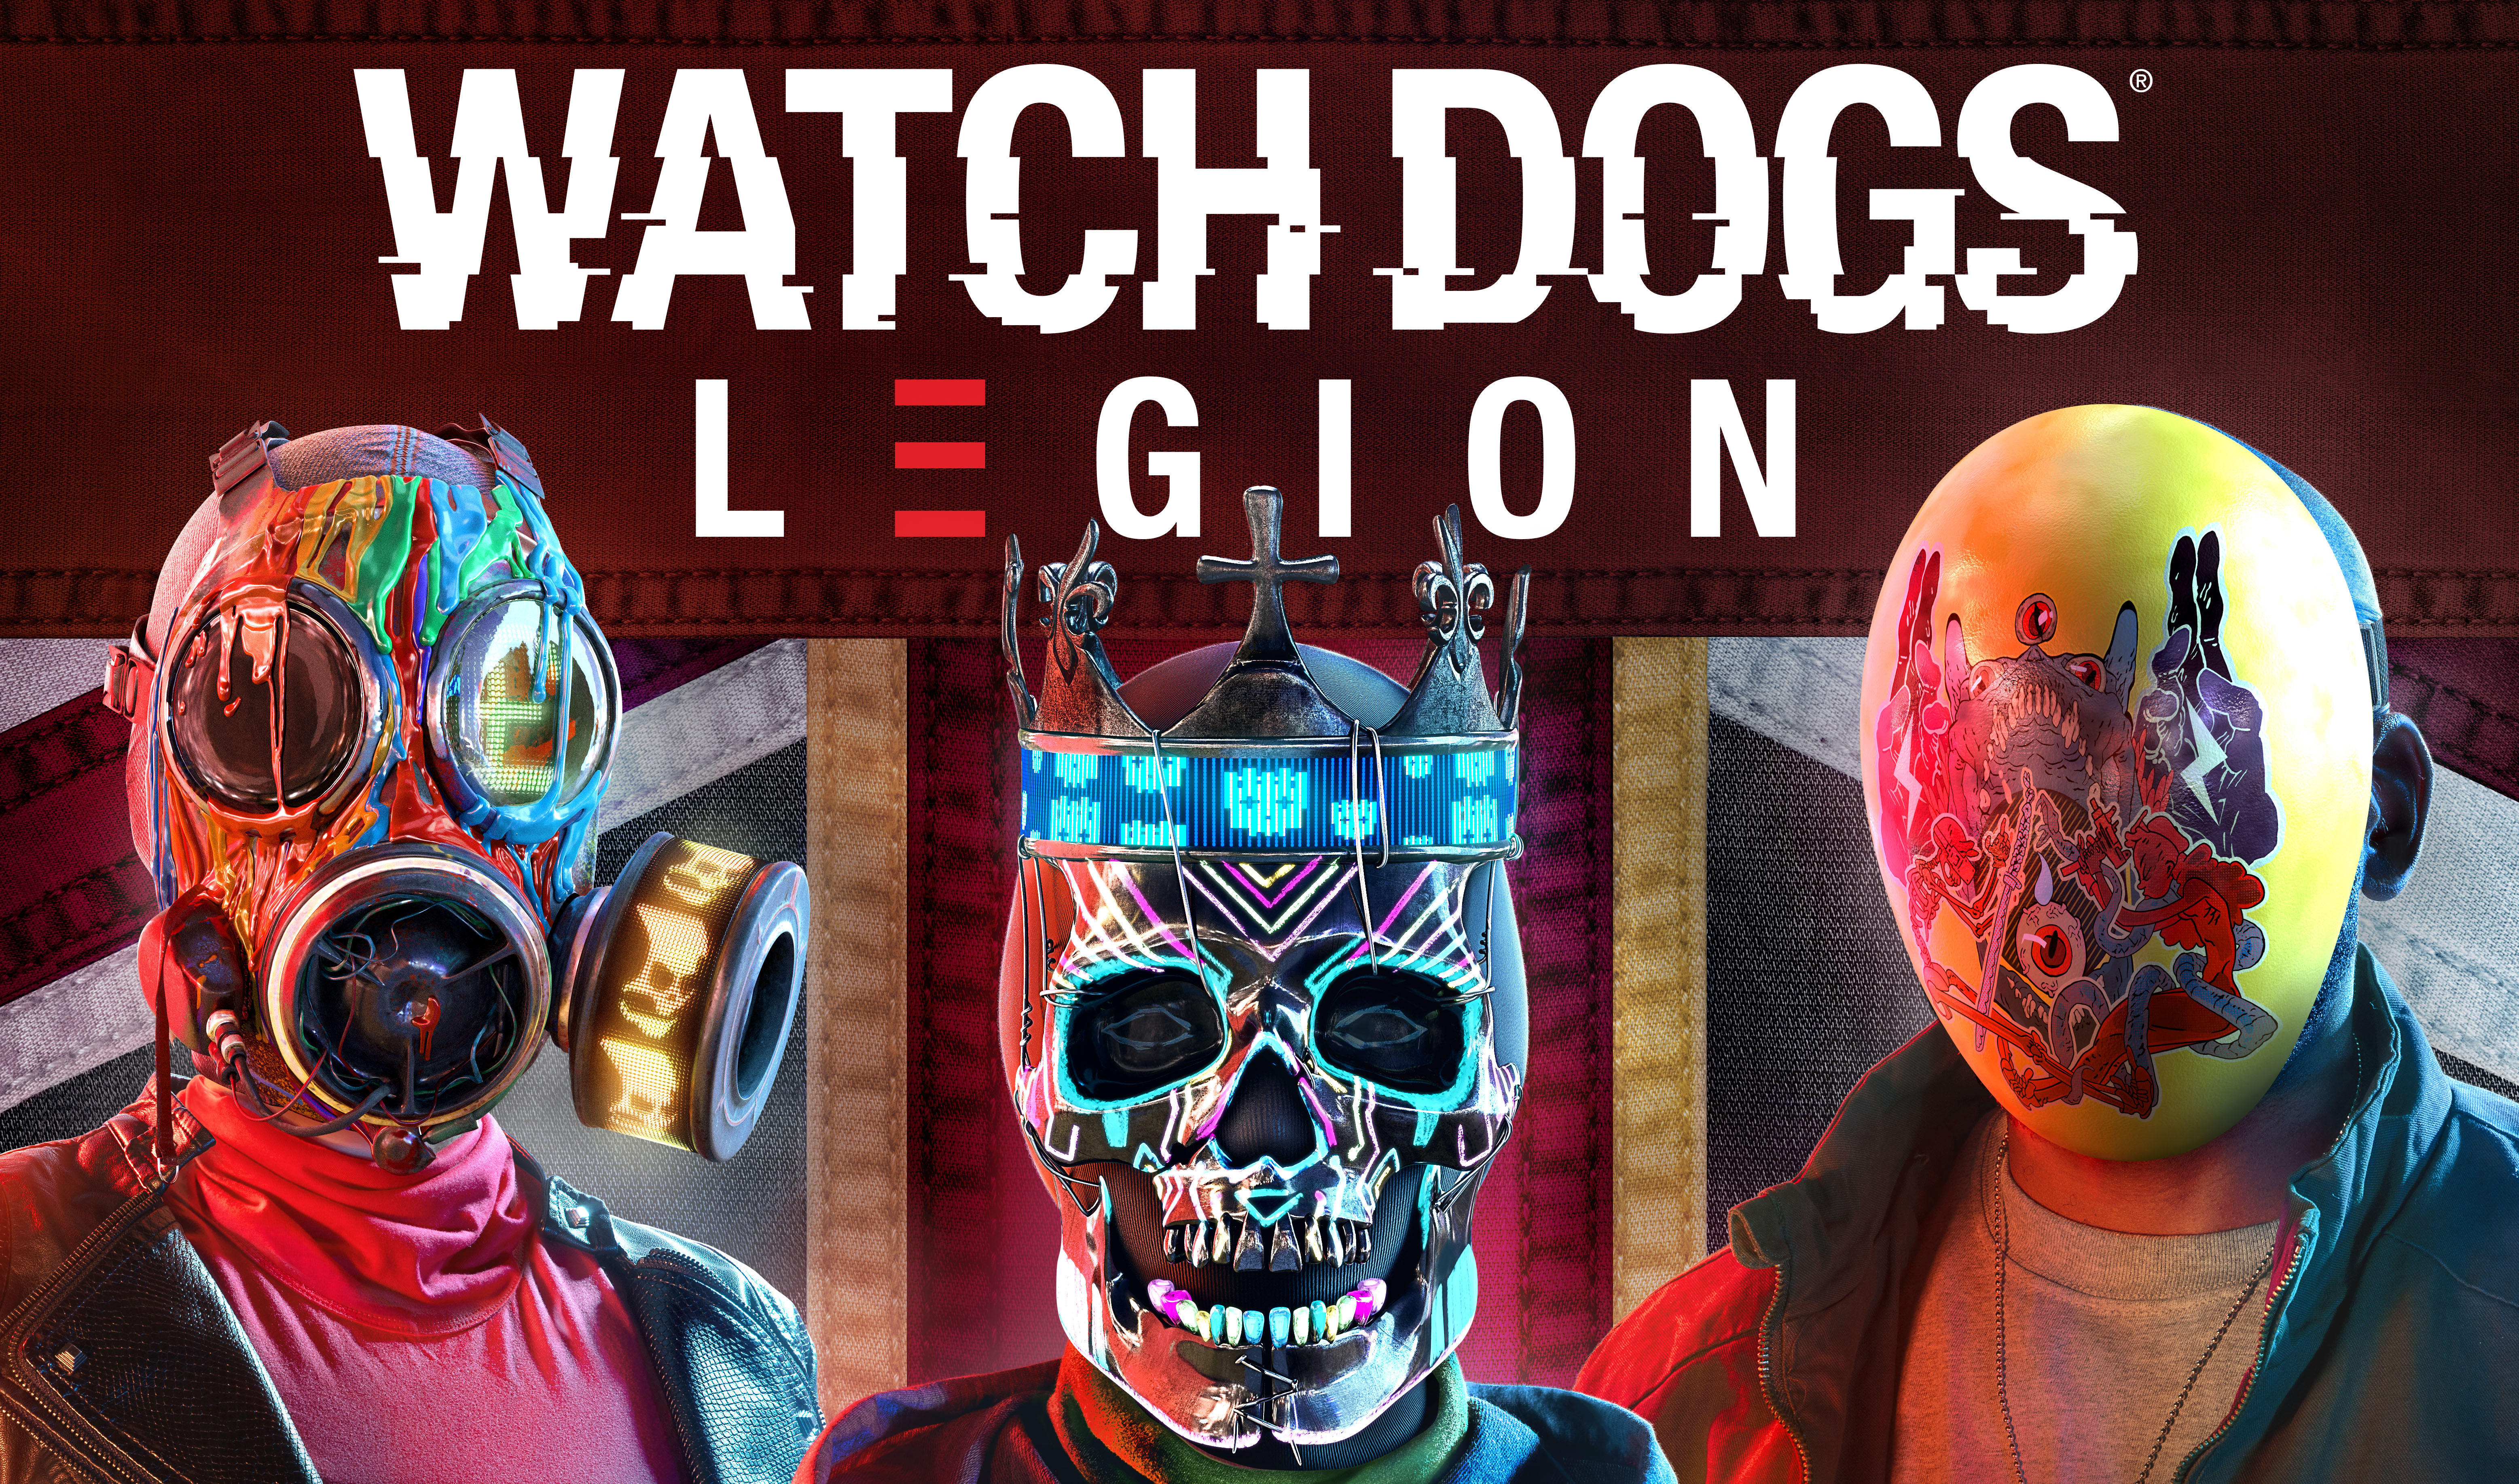 watch dogs, video game, watch dogs: legion